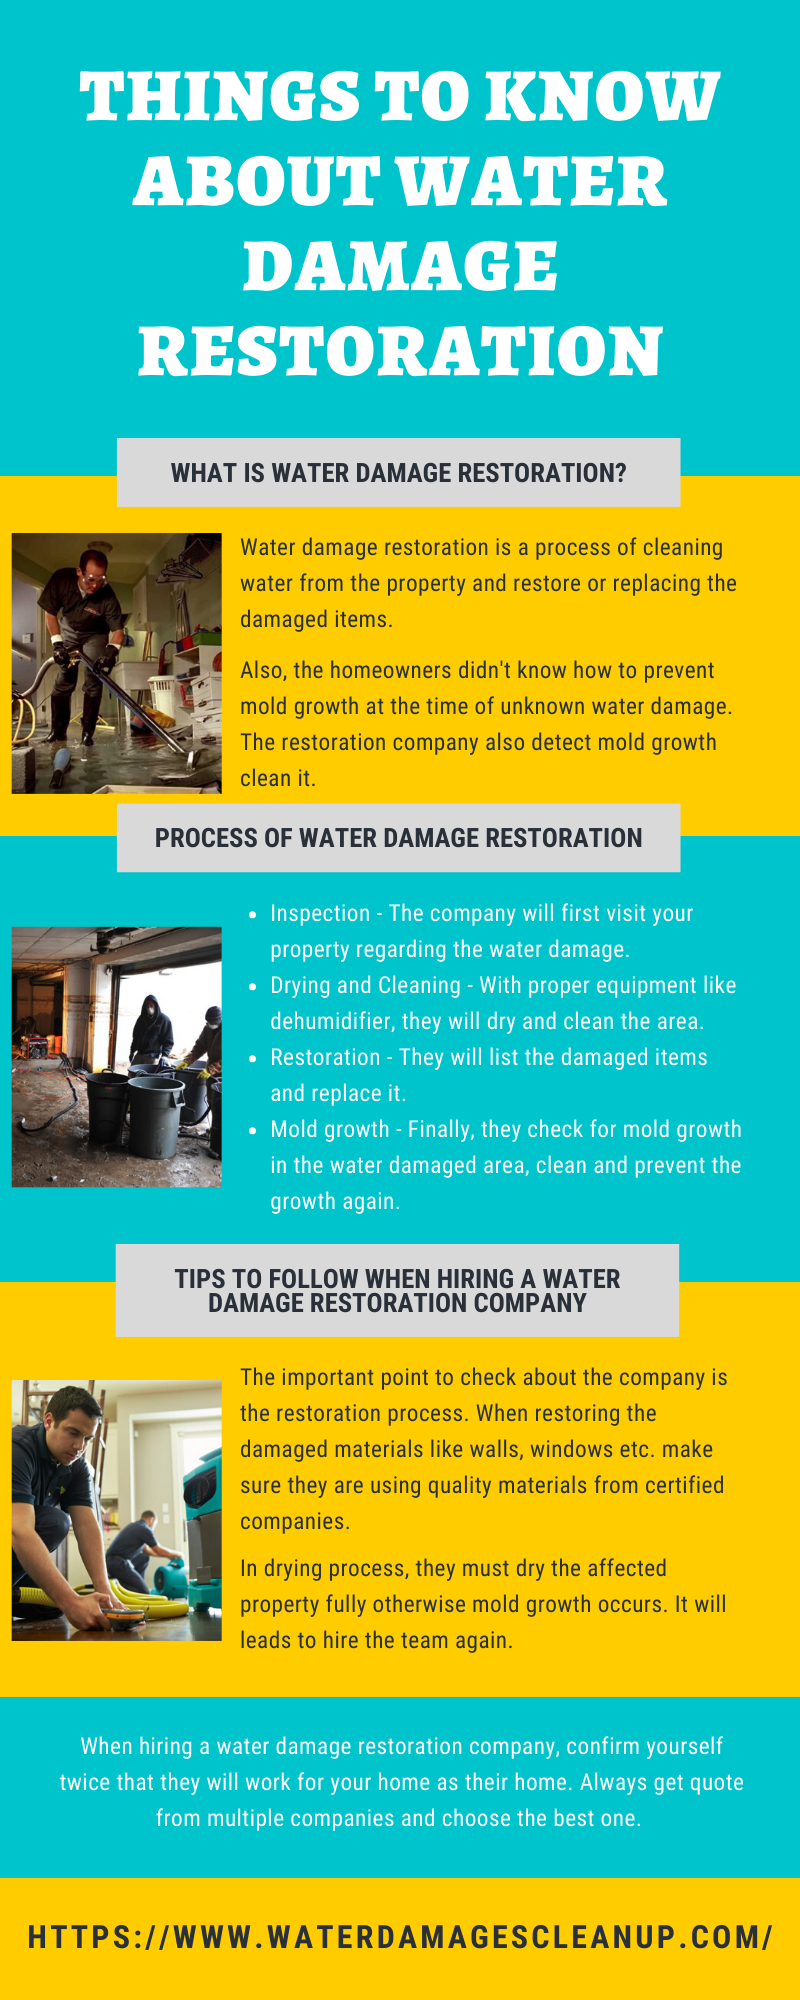 Things to Know About Water Damage Restoration